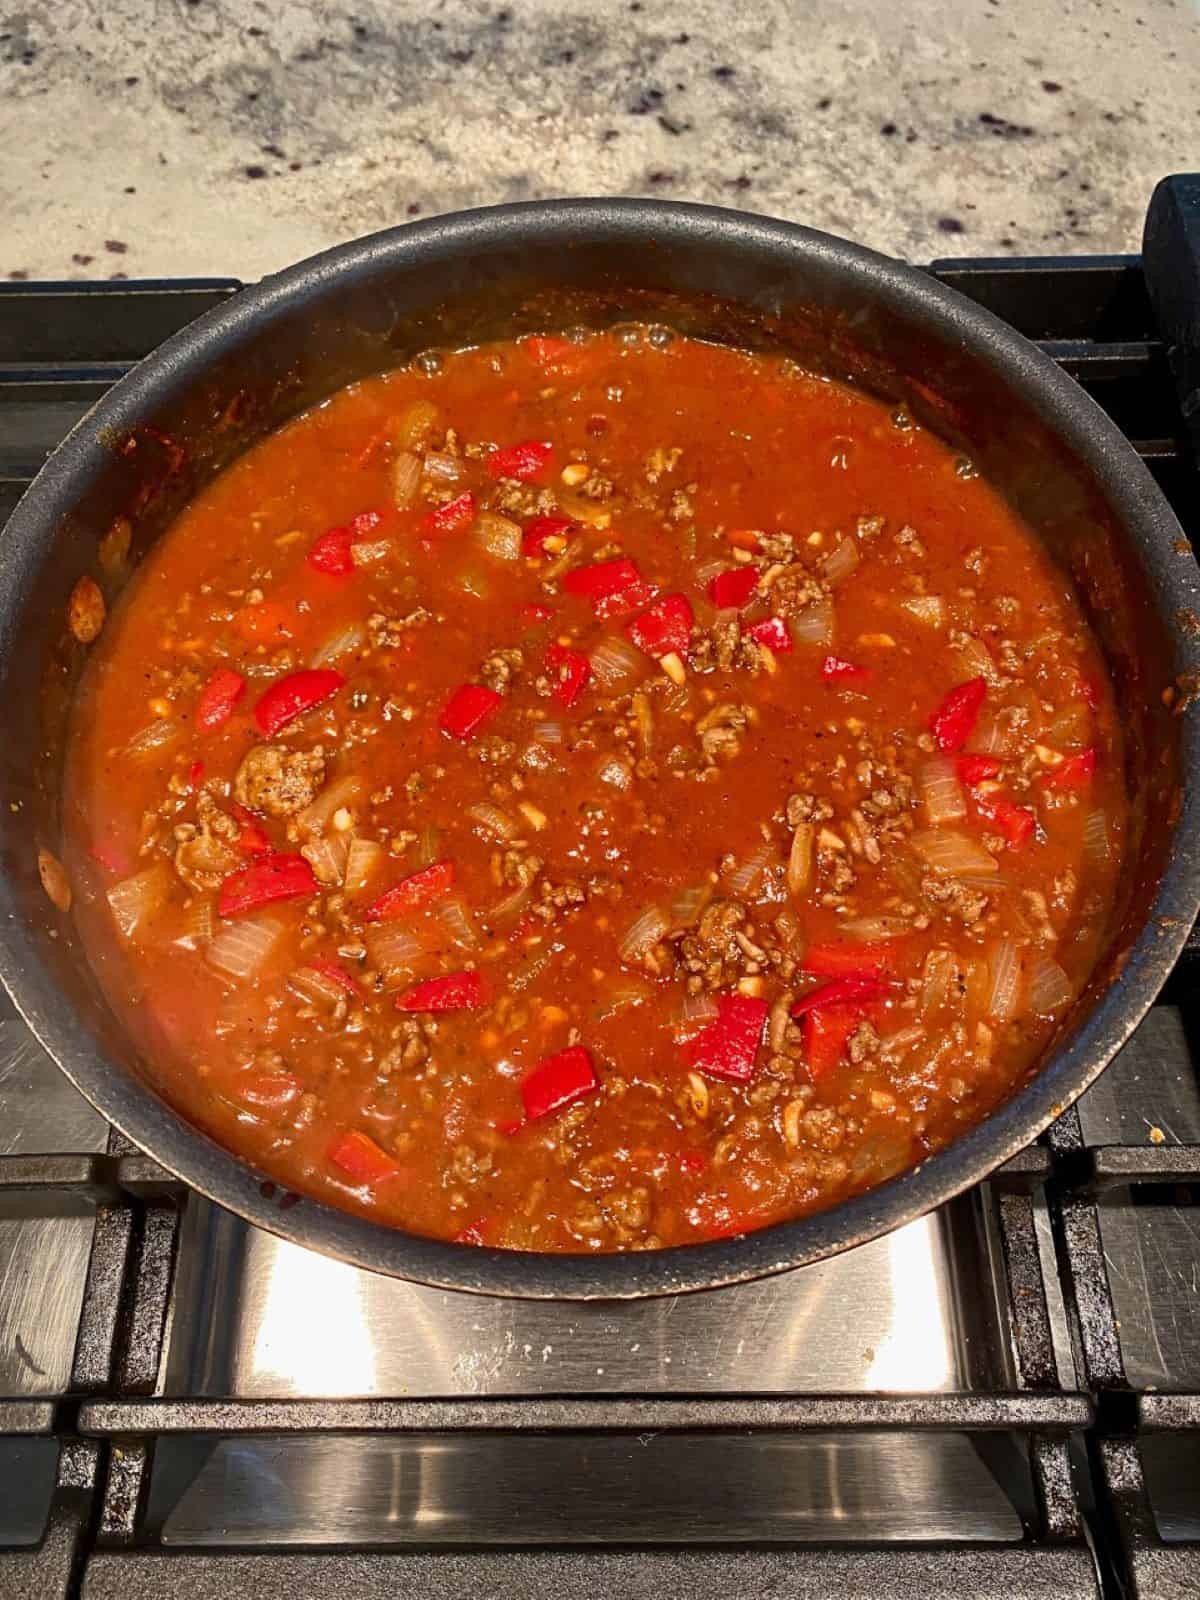 Homemade sloppy joes sauce brought to a boil and simmering in a skillet on the stove.